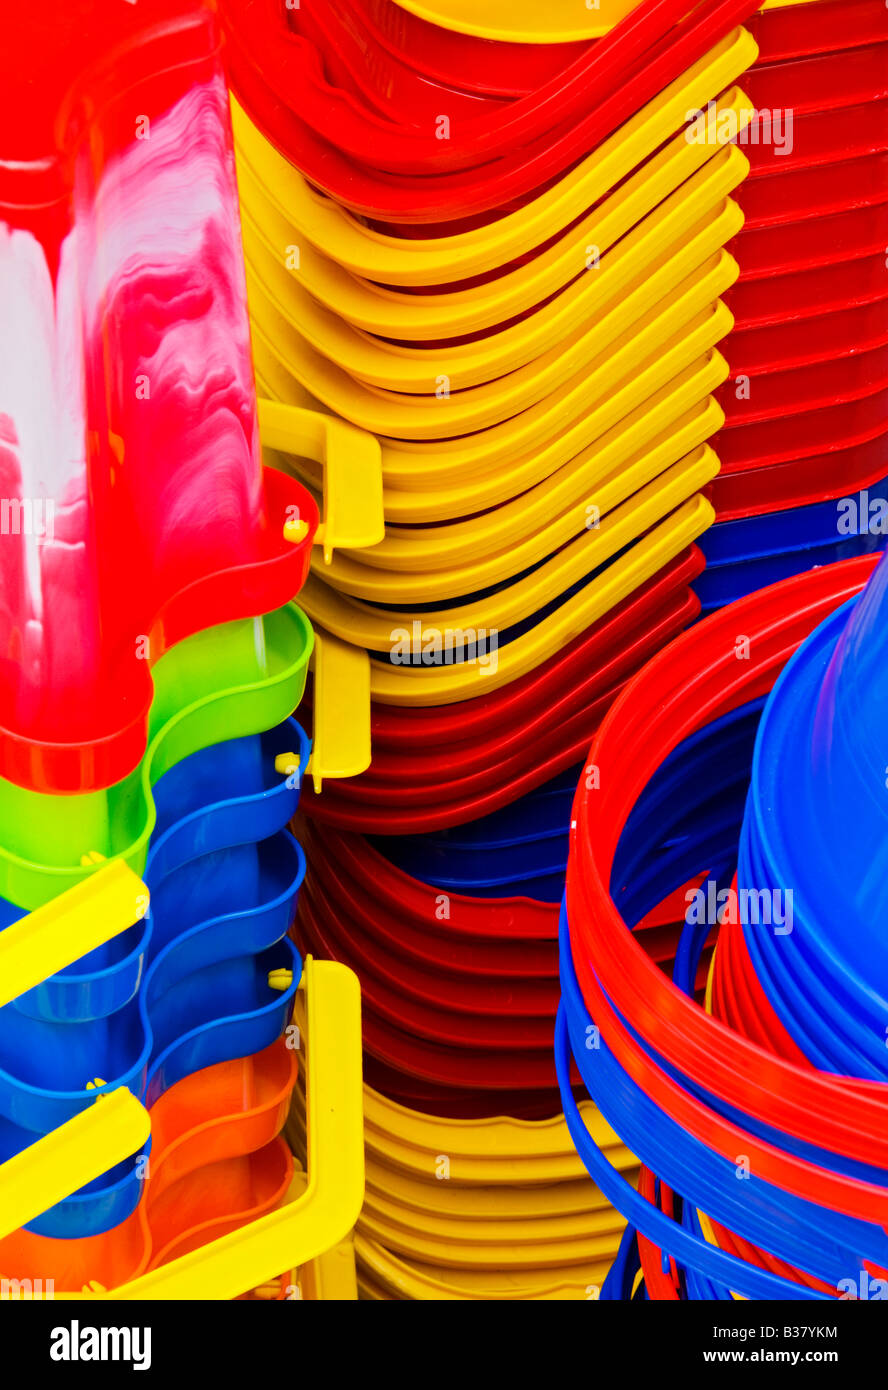 Pile of colorful buckets Stock Photo